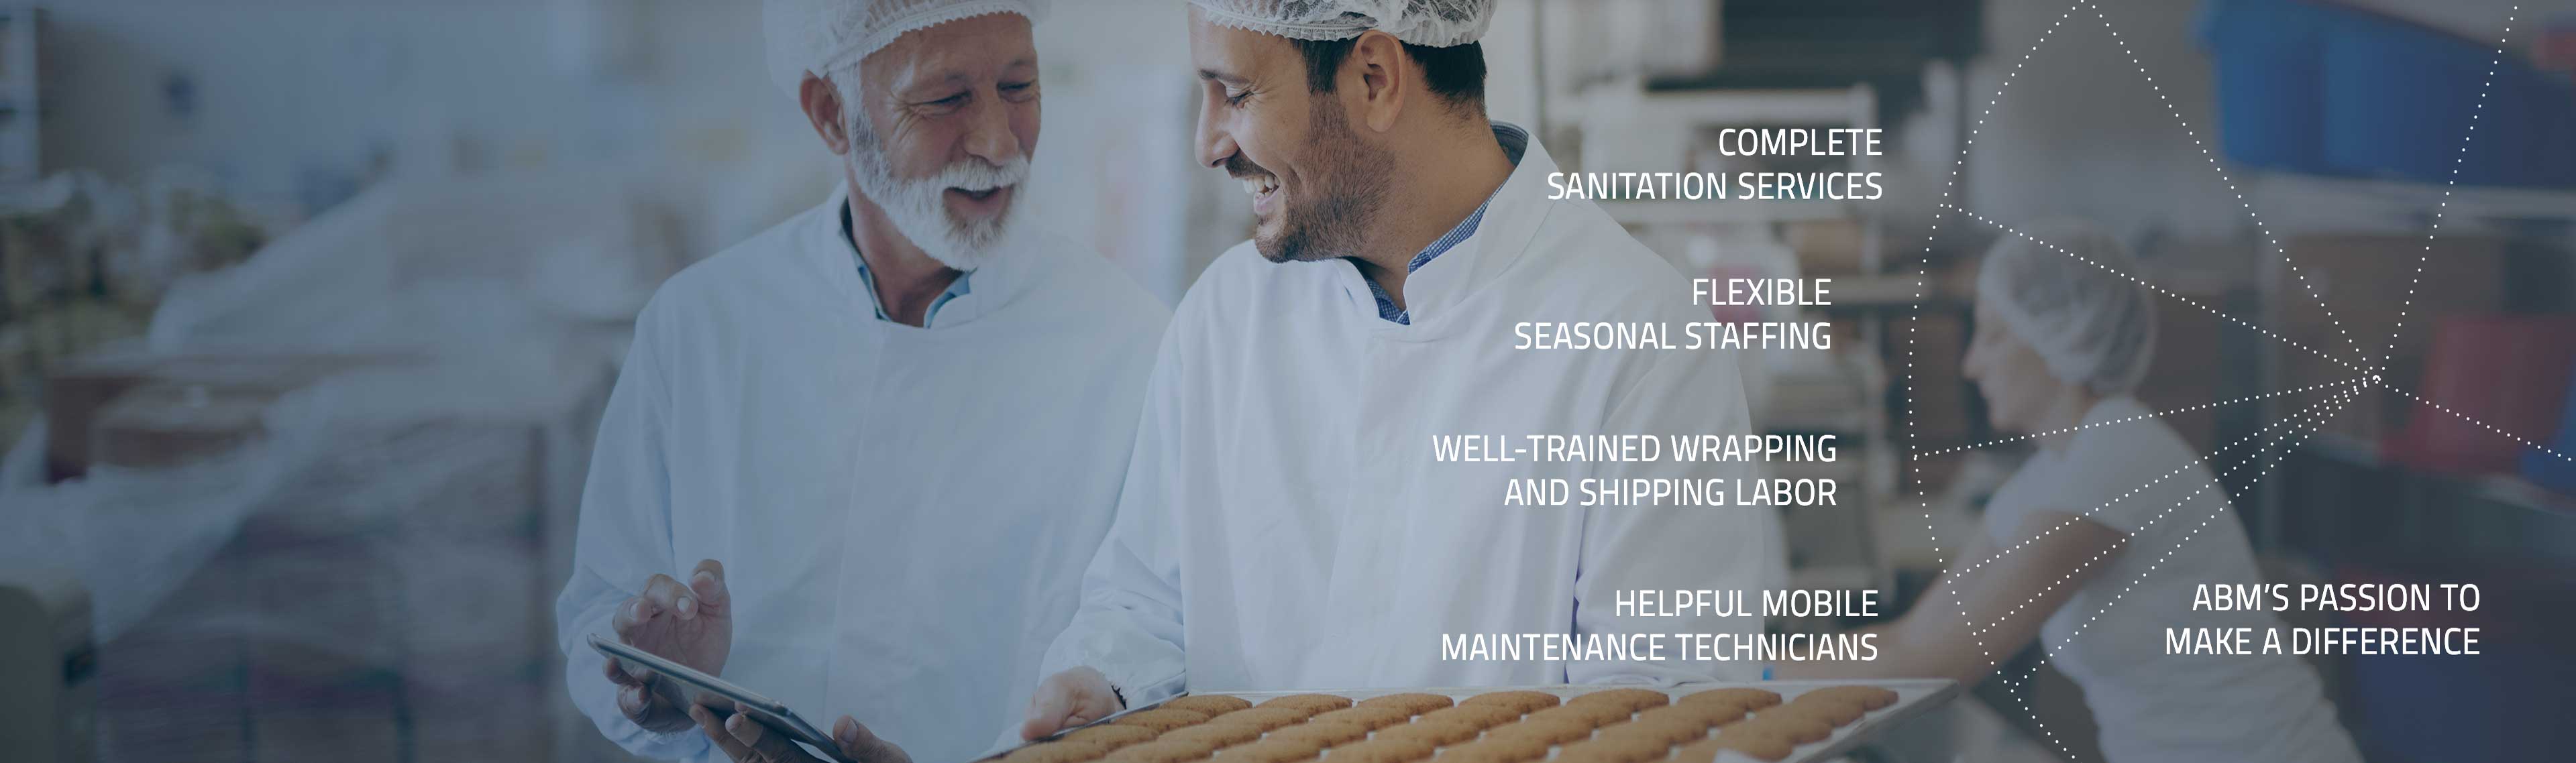 Facility Services for Food & Beverage Industries